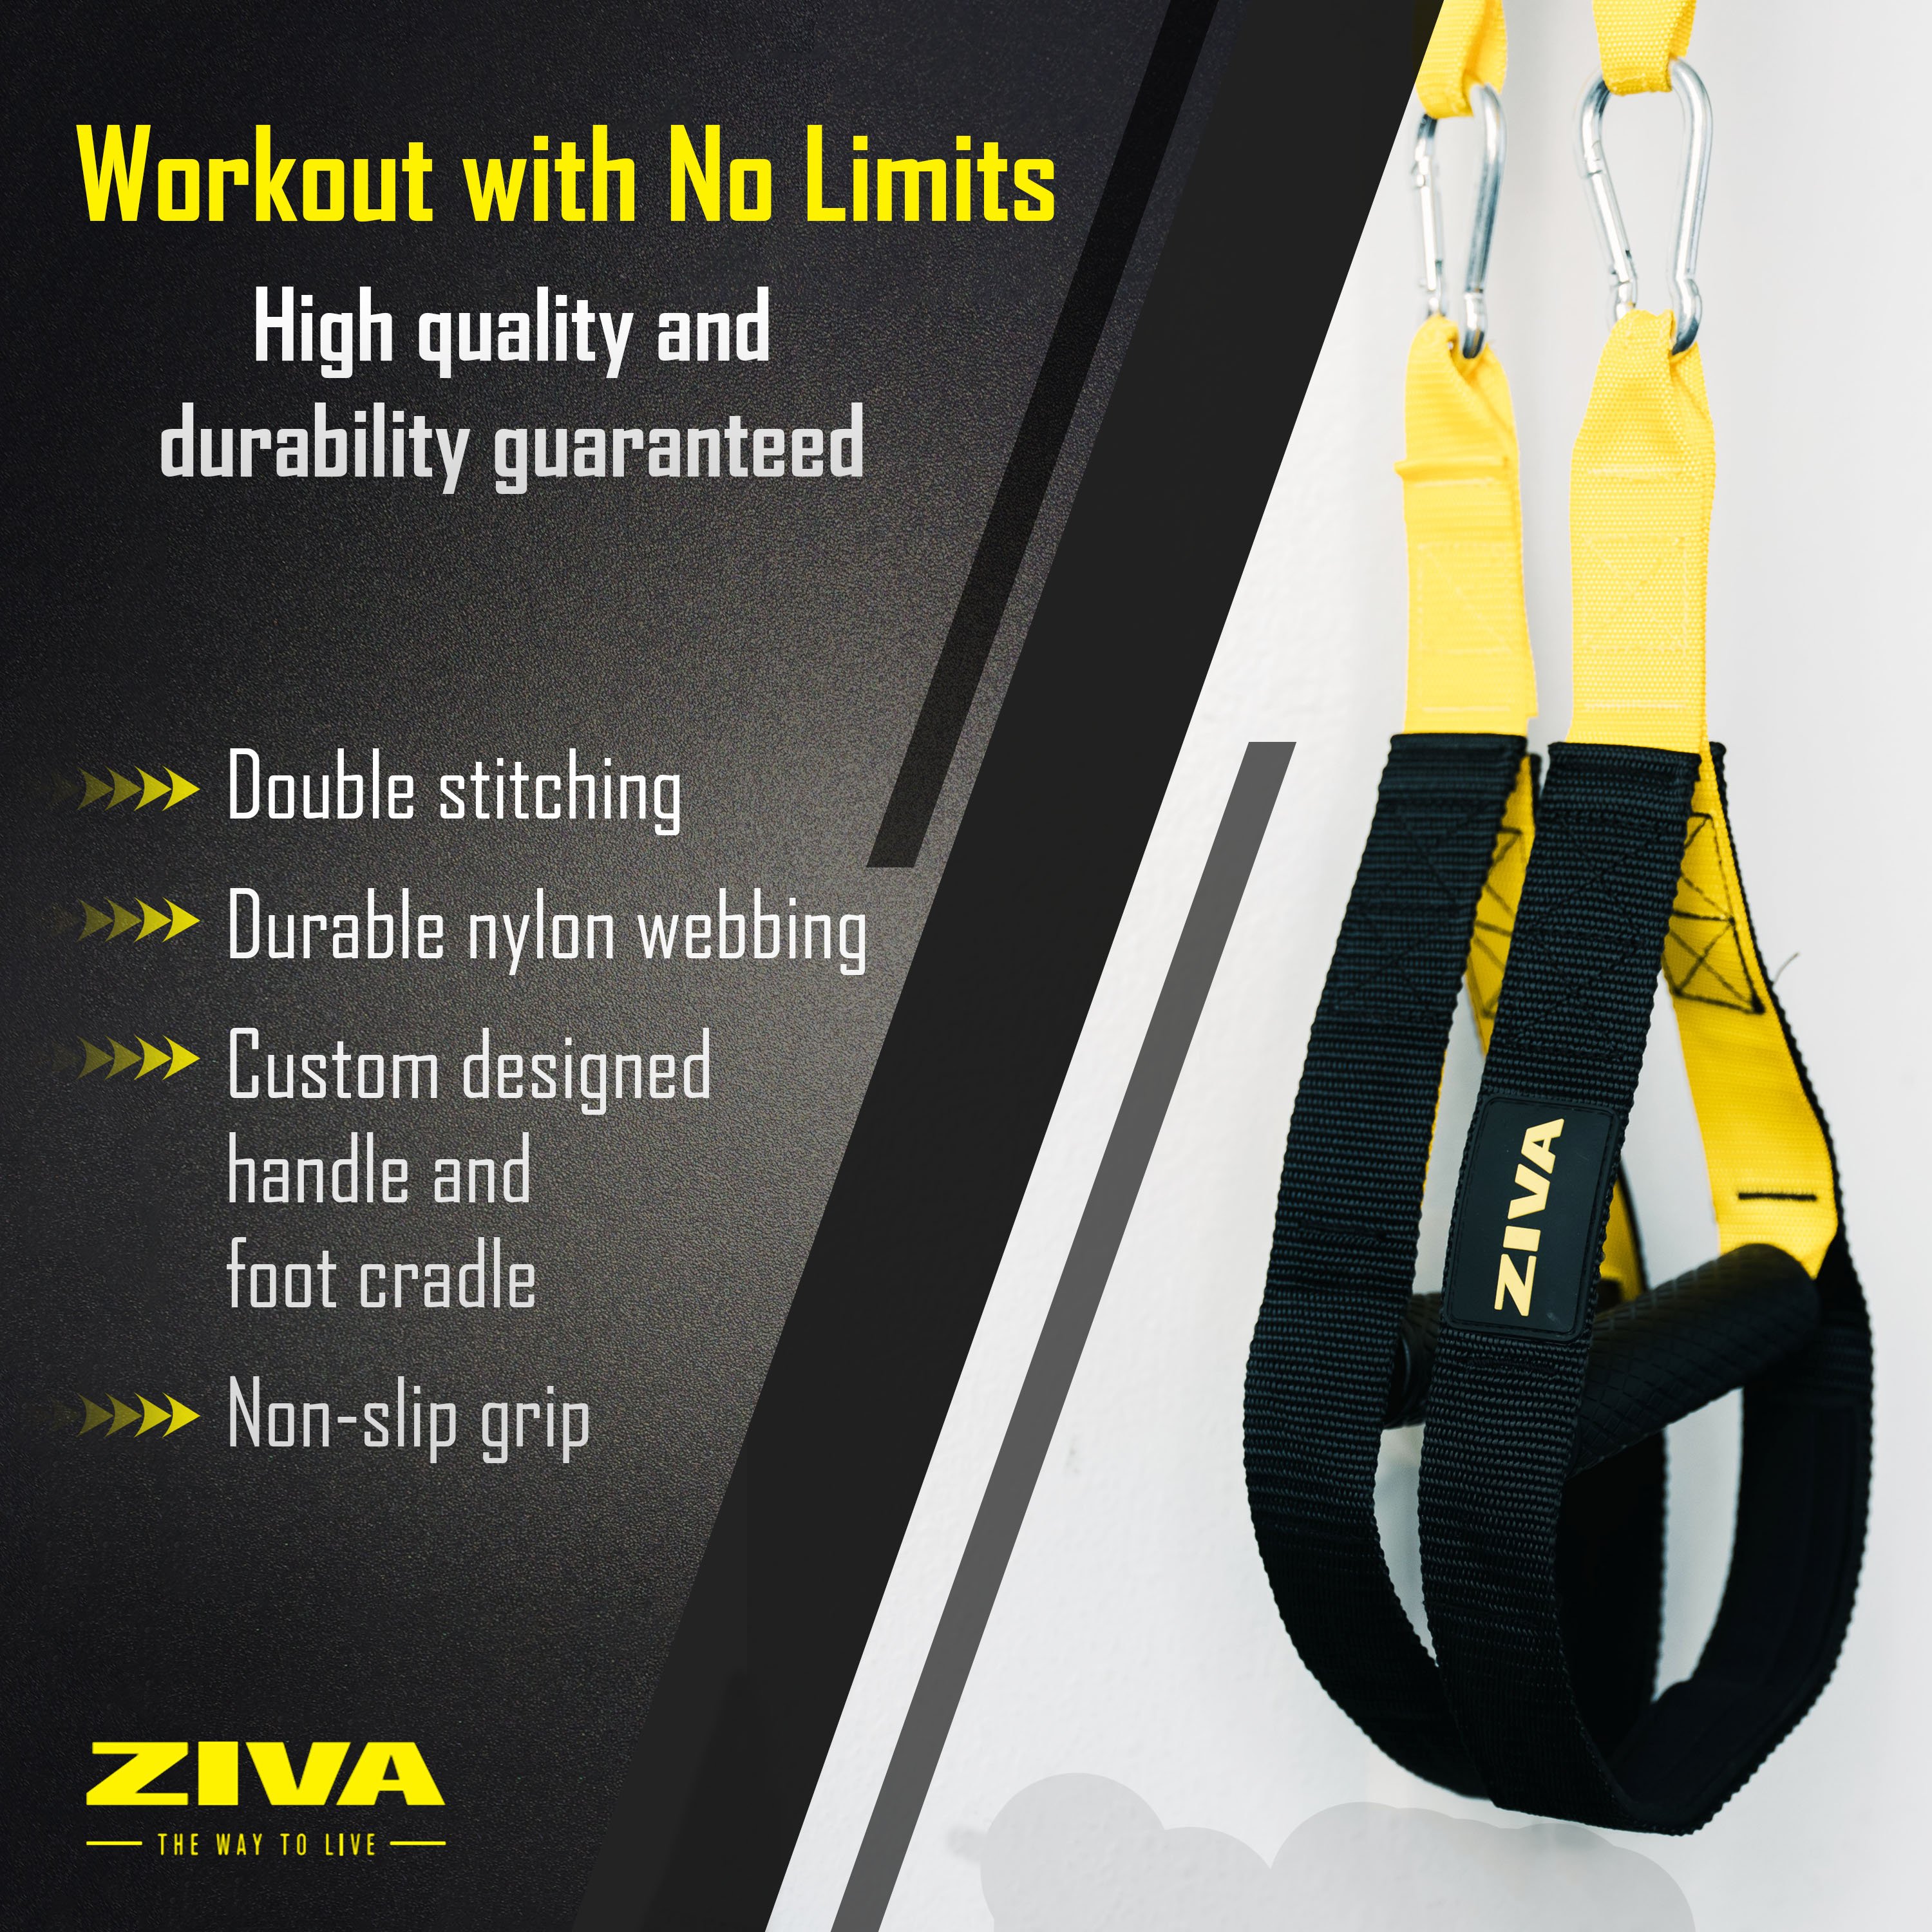 Workout with no limits. High quality and durability guaranteed. Double stitching. Durable nylon webbing. Custom designed handle and foot cradle. Non-slip grip.